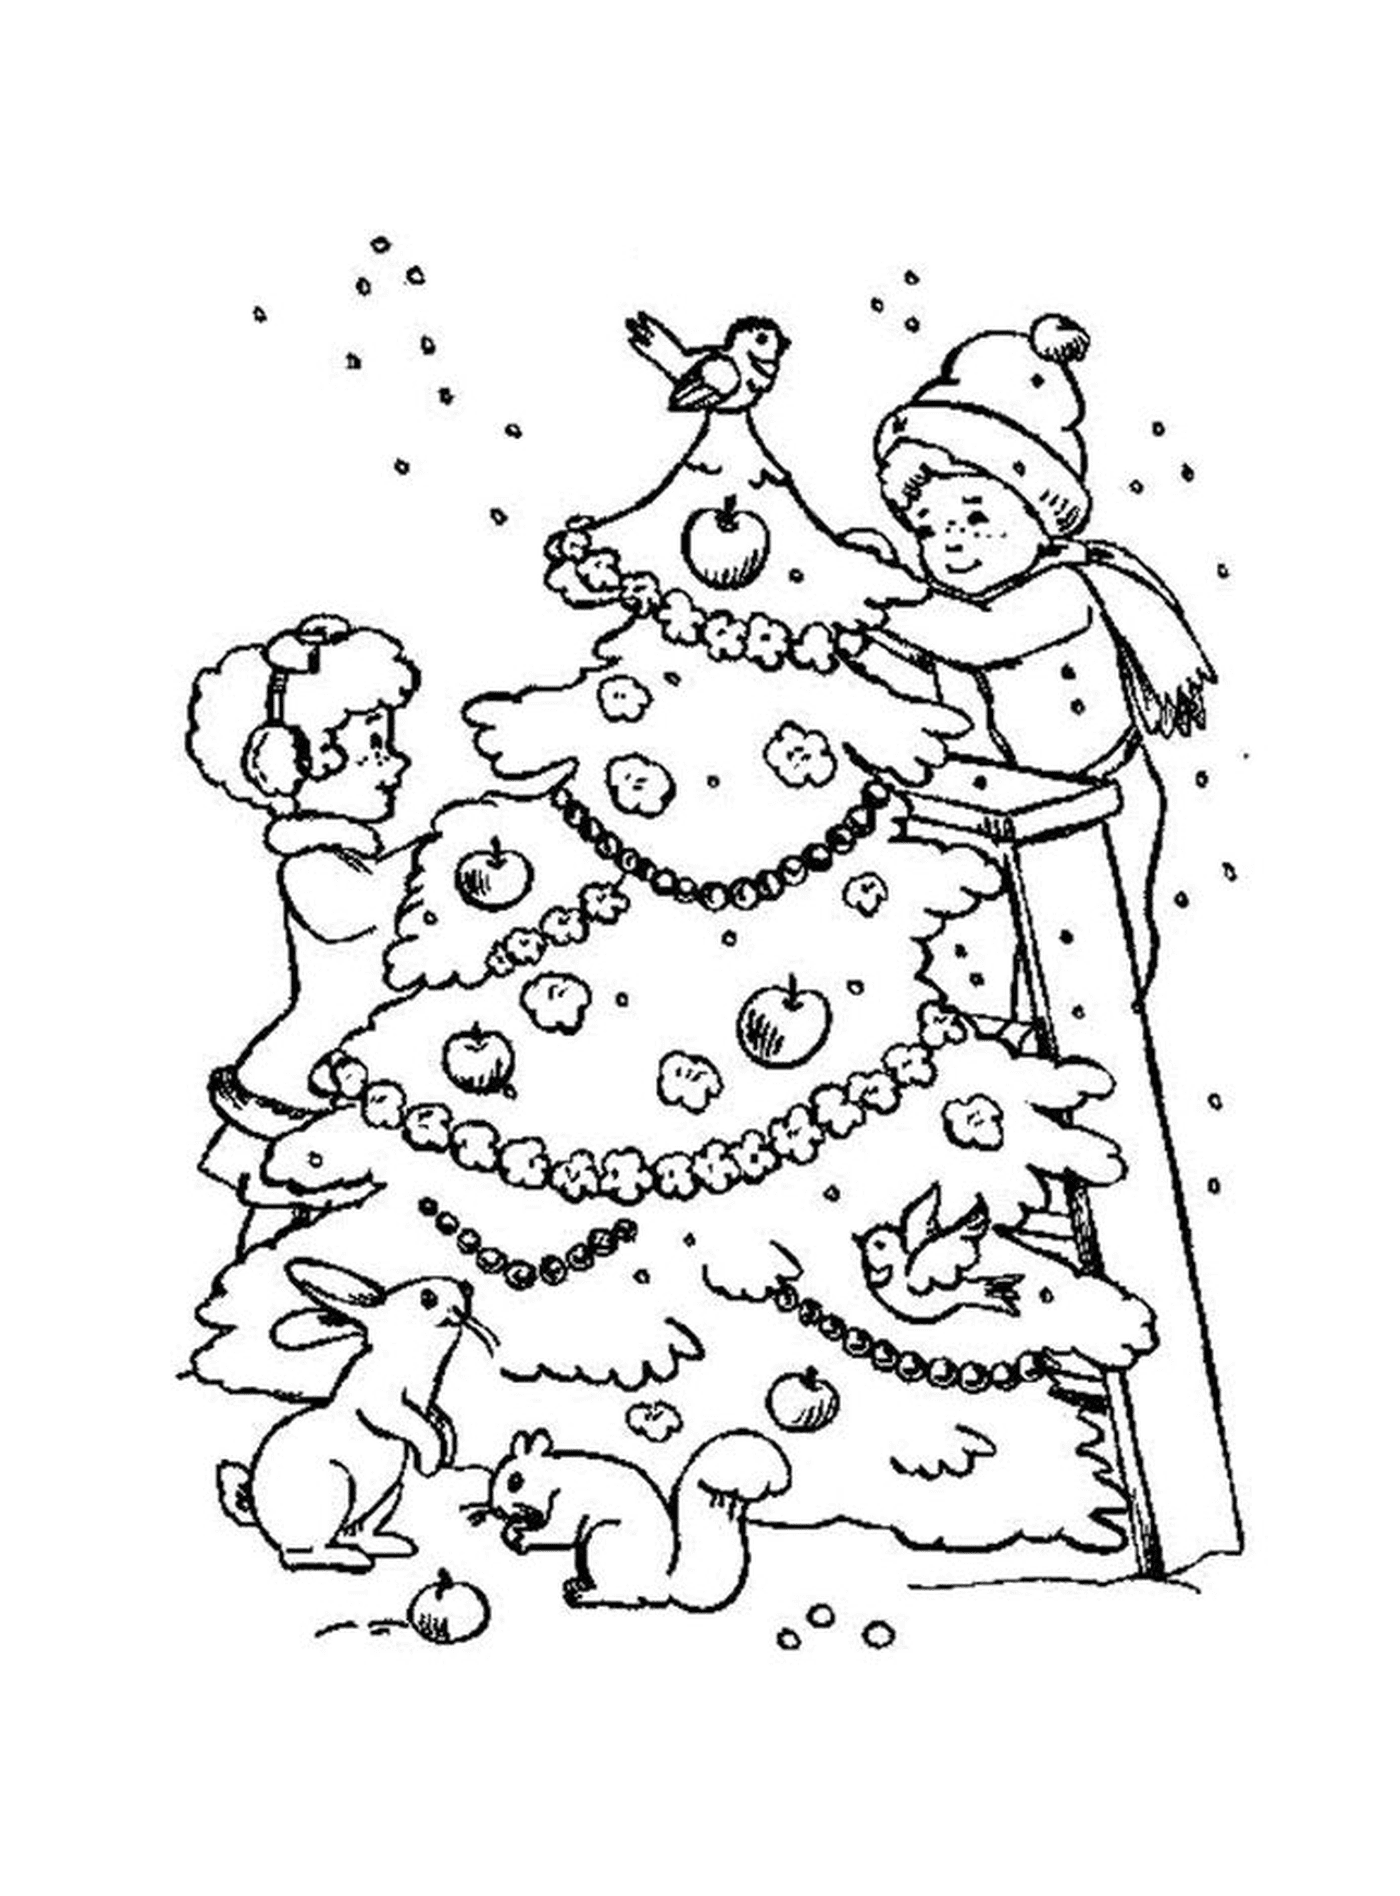  A child standing in front of a Christmas tree 